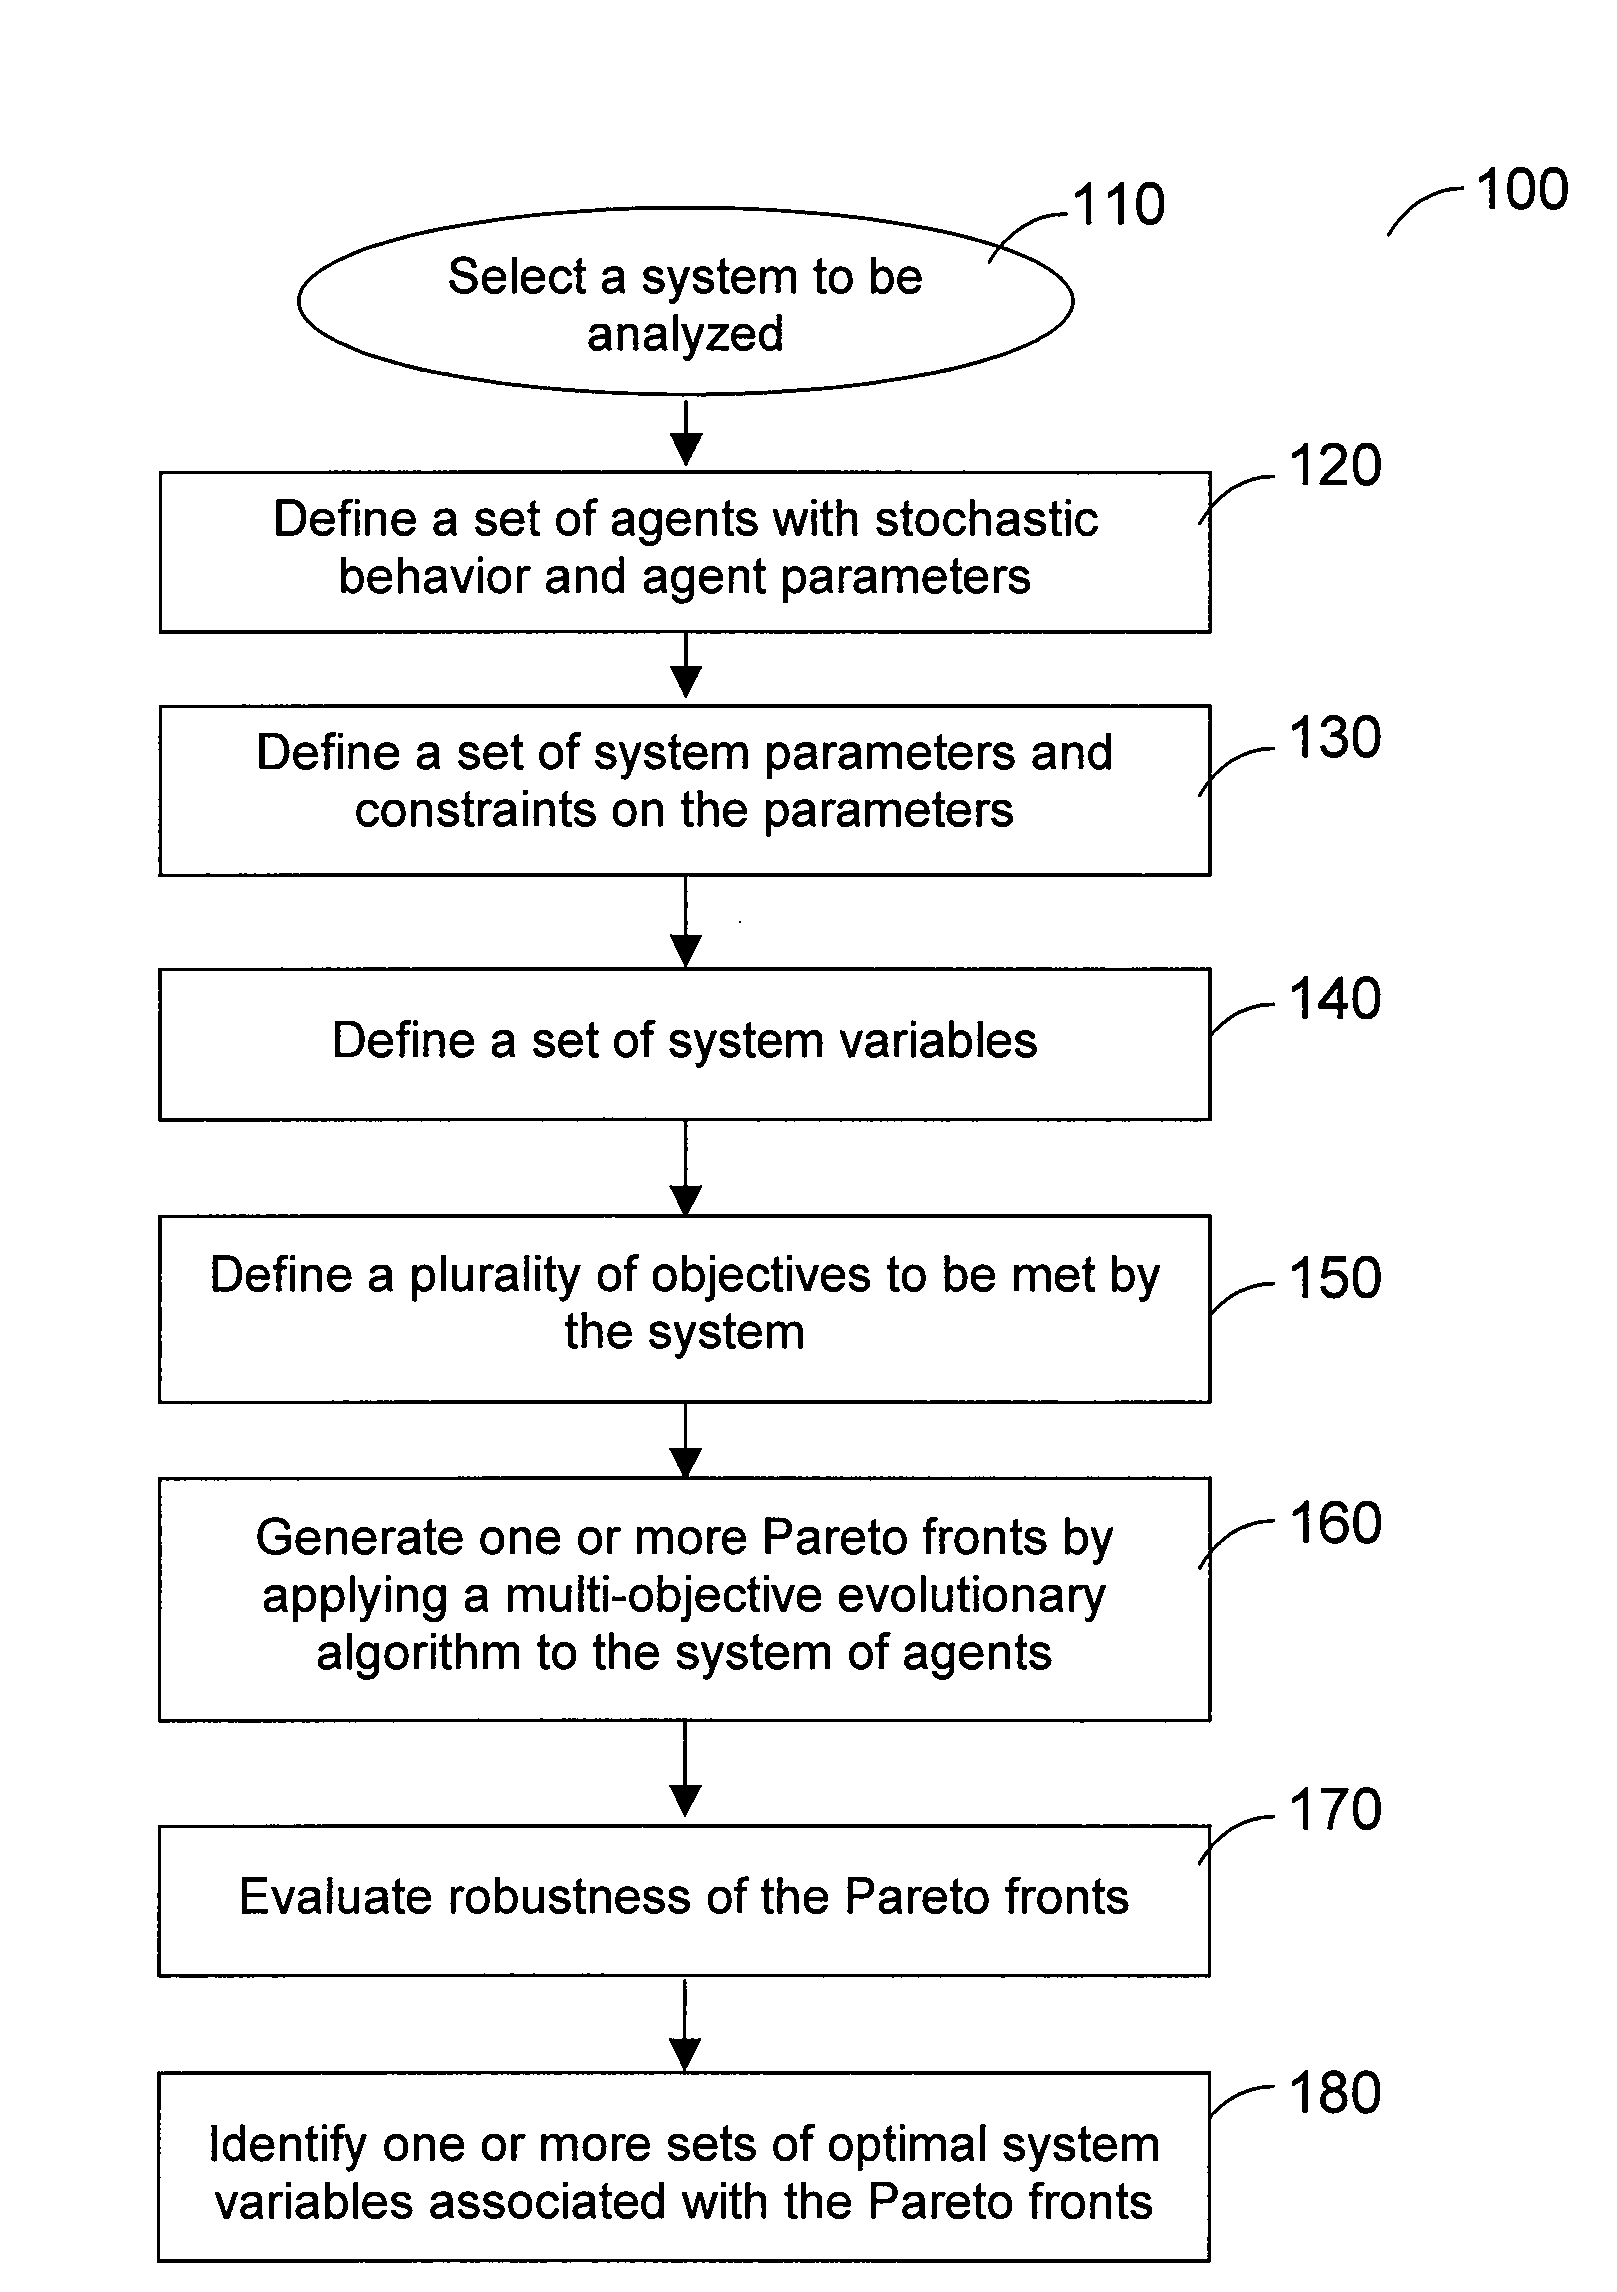 System, method, and computer-accessible medium for providing a multi-objective evolutionary optimization of agent-based models